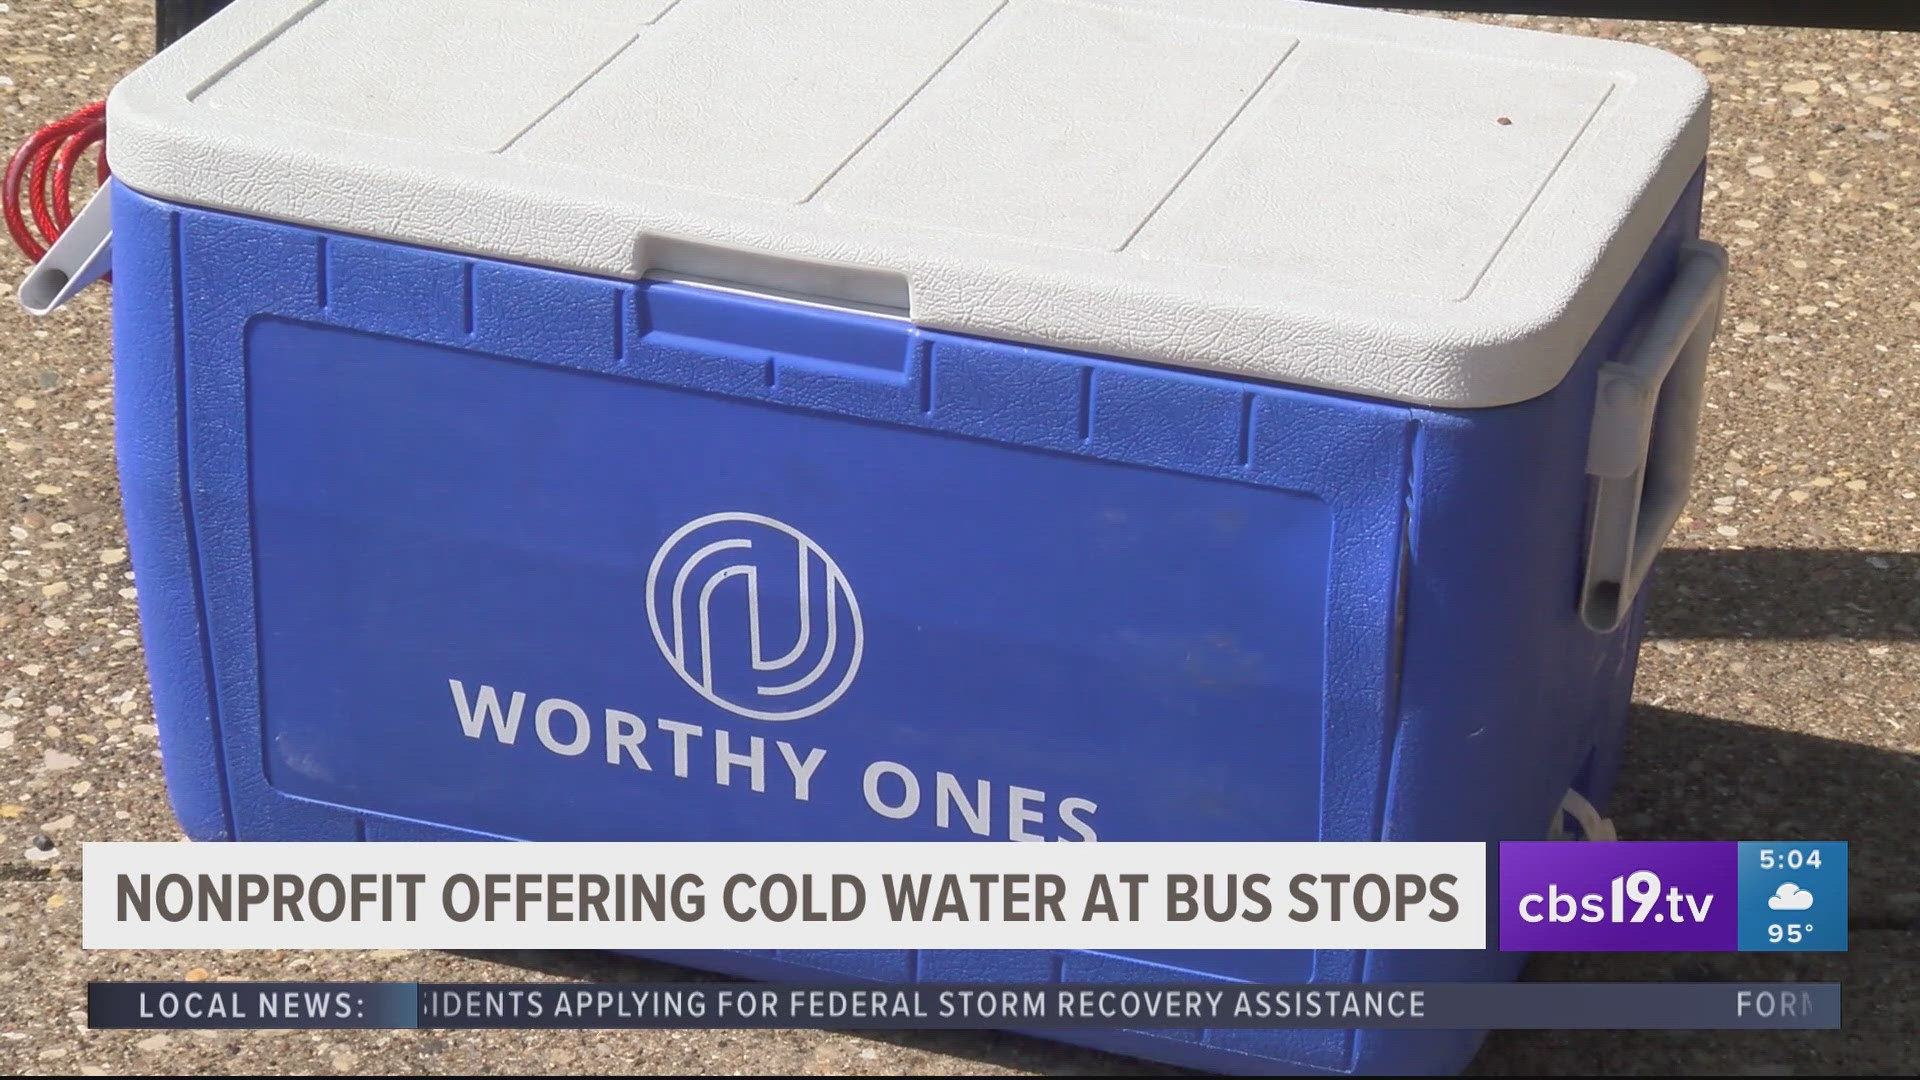 Bus Stop Water Project works to hydrate neighbors amid high demand